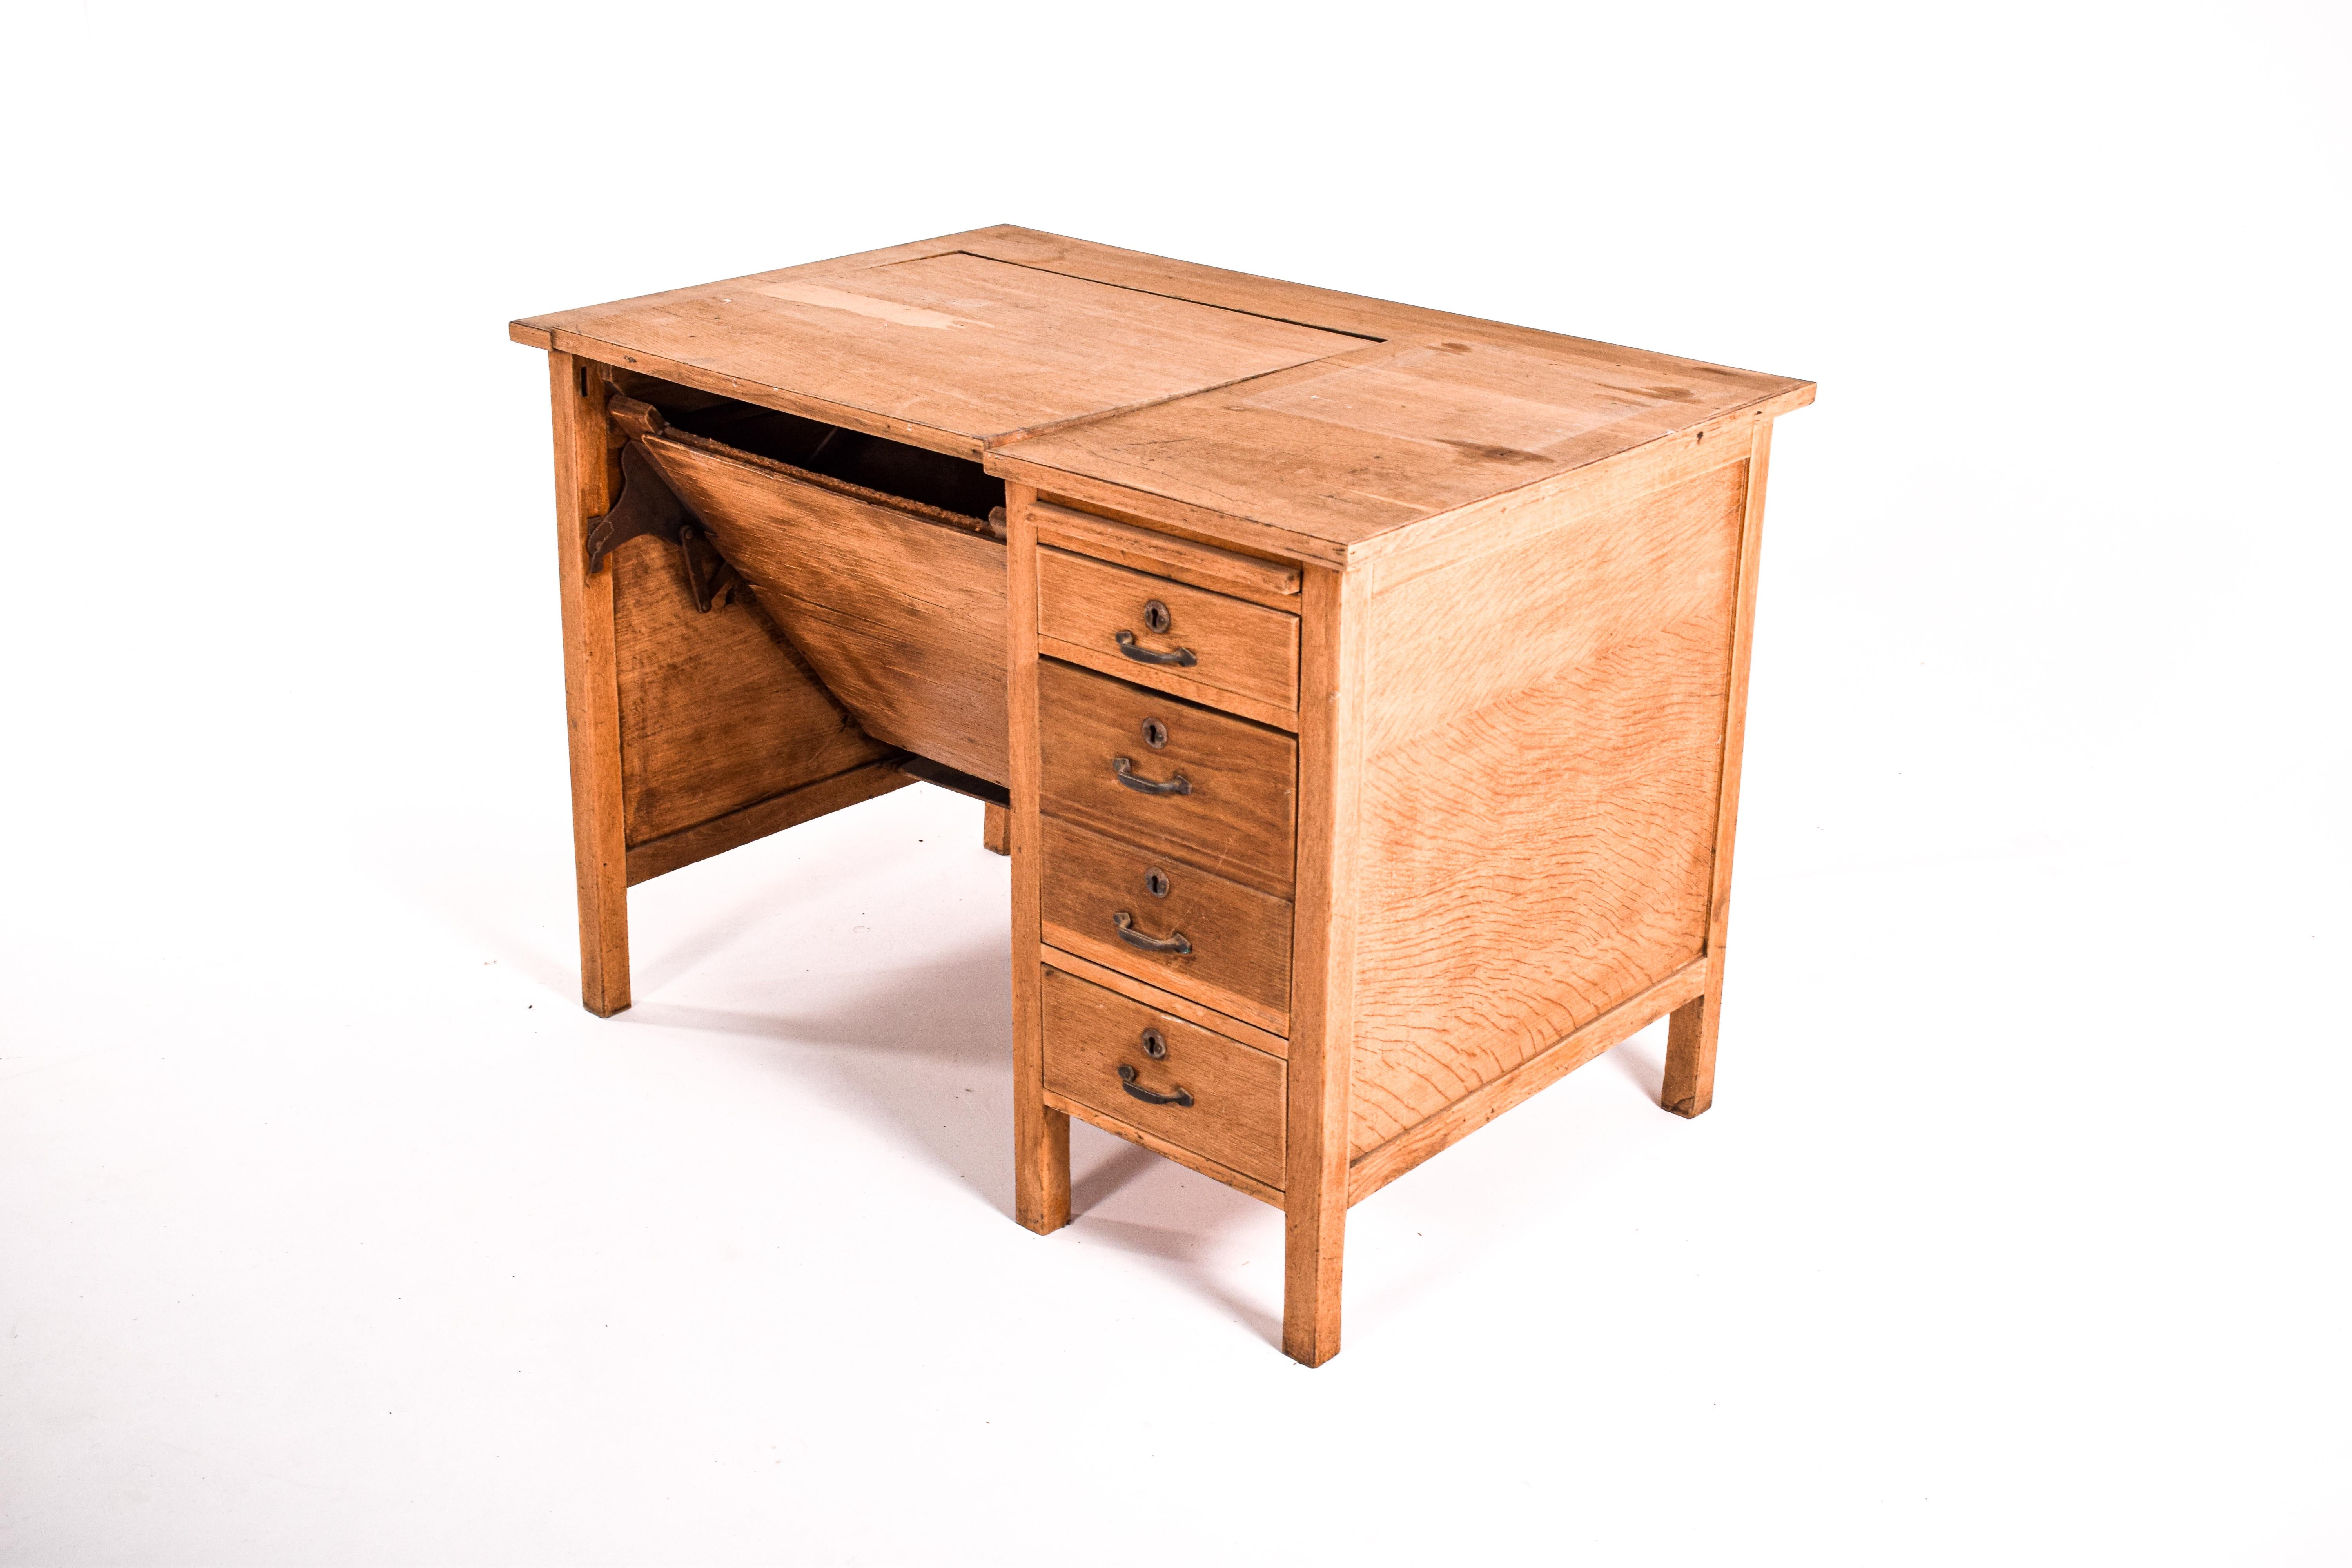 Rare desk from the Portuguese factory Olaio. Made in 1950 with oak wood. This desk have 3 drawers, one of them is a file. One drawing board. Removable top with space to store the typewriter. Unique model. An equal model has never been seen yet for